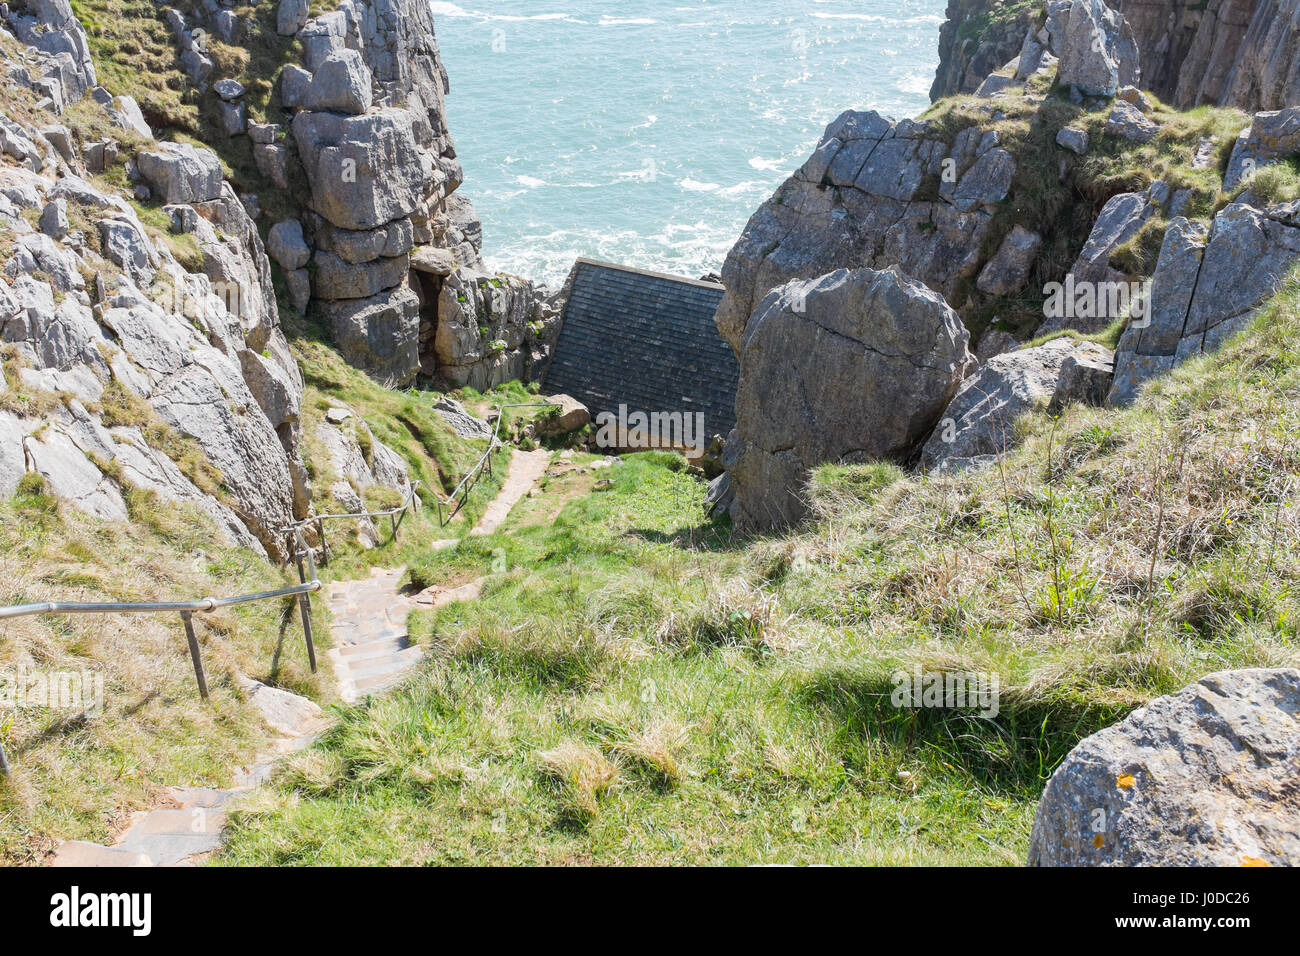 Saint Govan's Chapel which is built into the side of a limestone cliff at Saint Govan's Head on the Pembrokeshire Coast Path in Wales Stock Photo